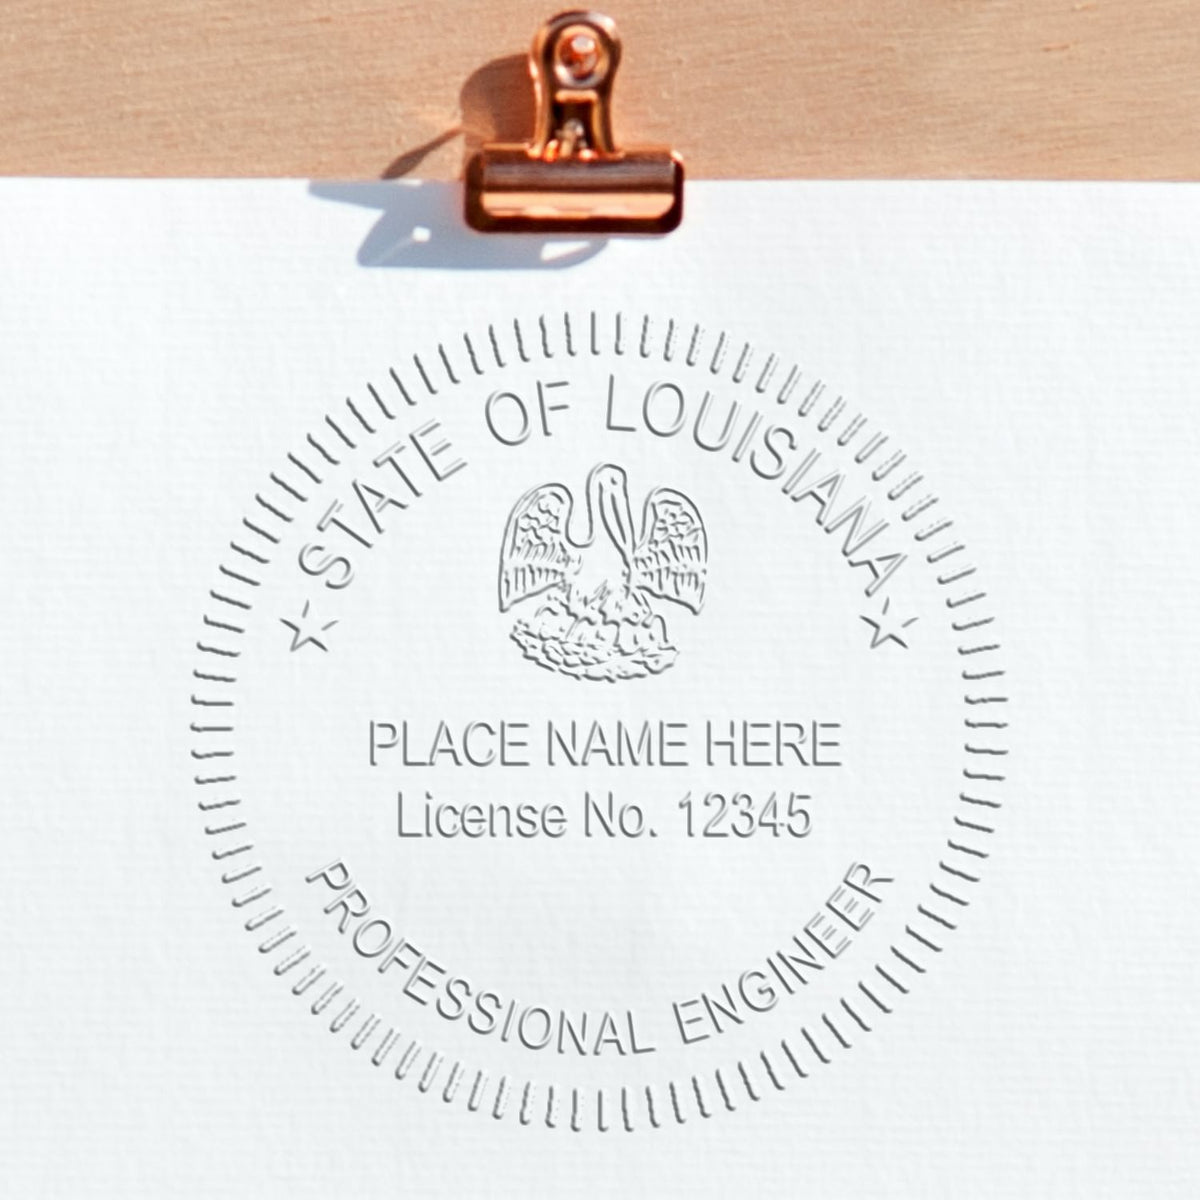 A photograph of the Soft Louisiana Professional Engineer Seal stamp impression reveals a vivid, professional image of the on paper.